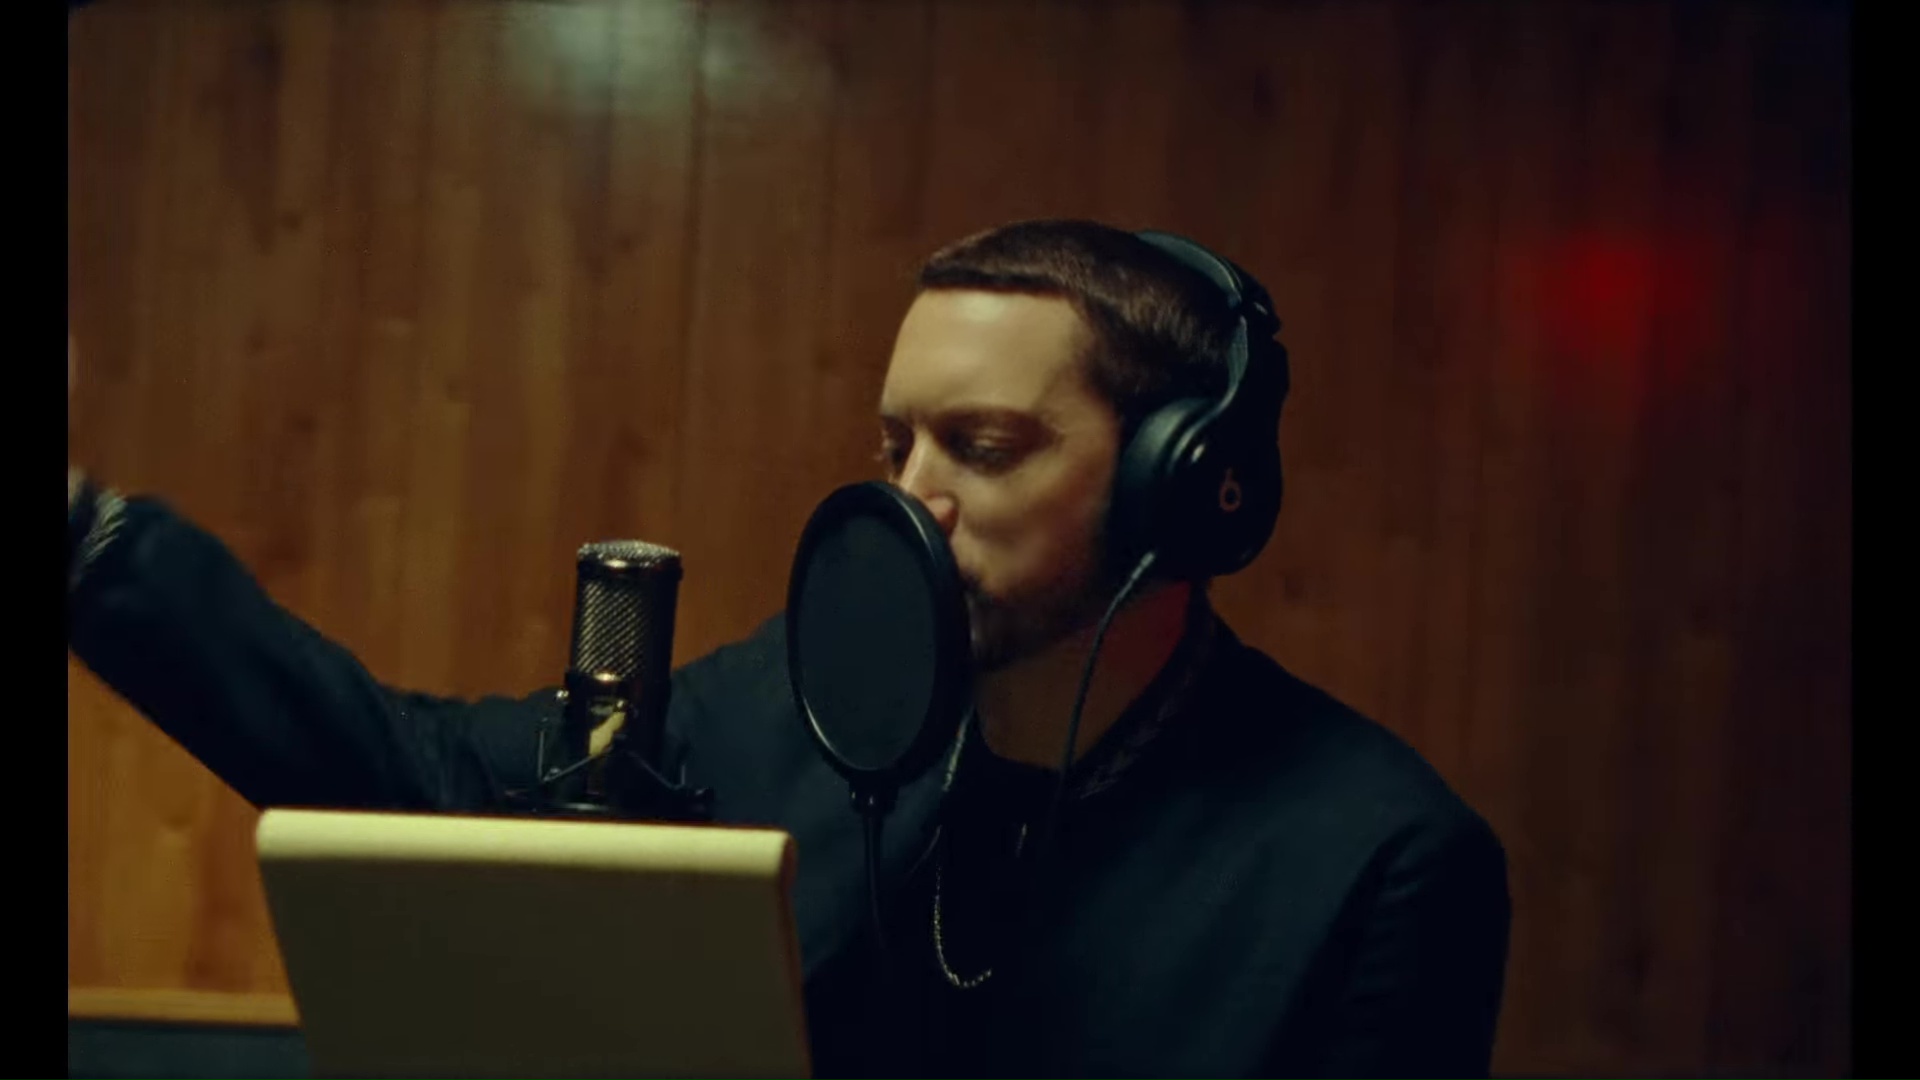 Beats Headphones in River by Eminem ft. Ed Sheeran (2018) Official Music Video1920 x 1080